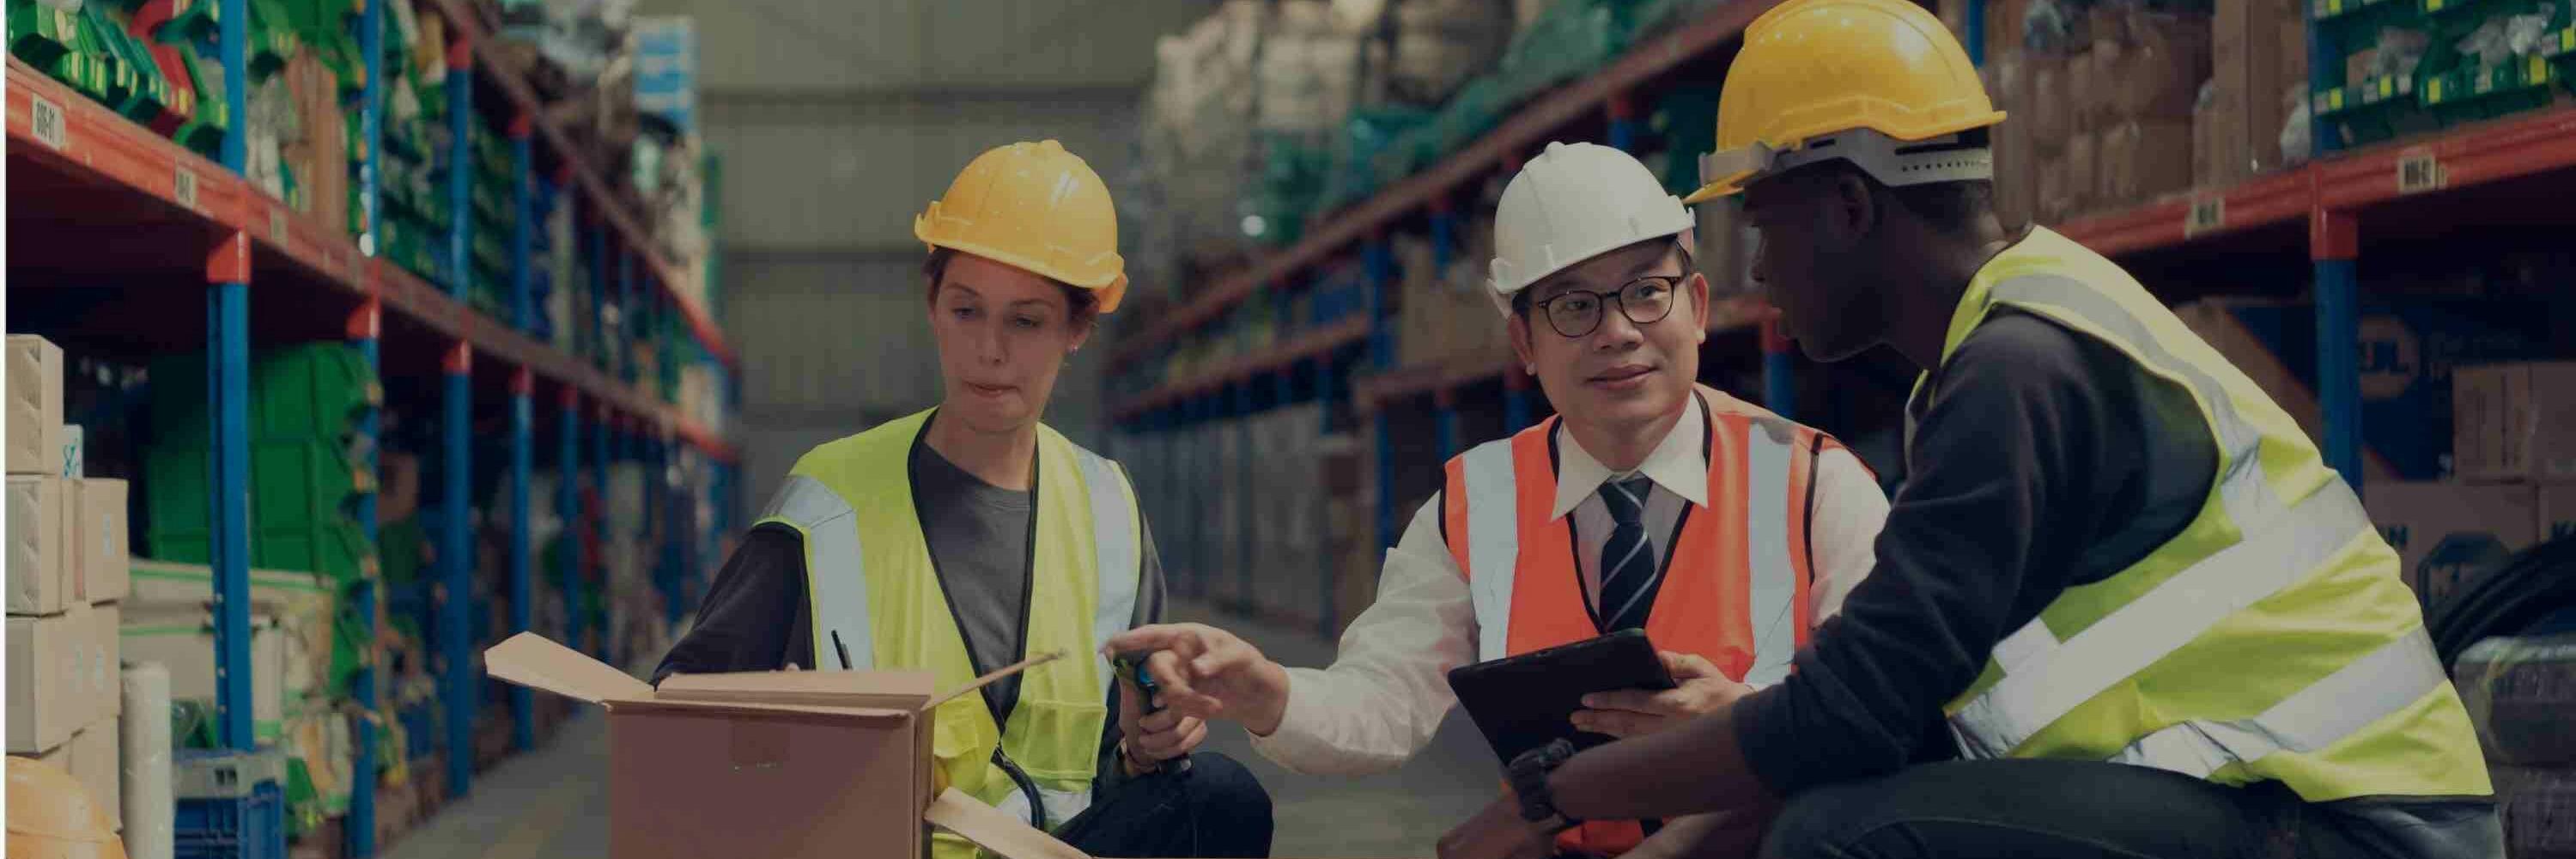 Three employees in hard hats in a warehouse setting